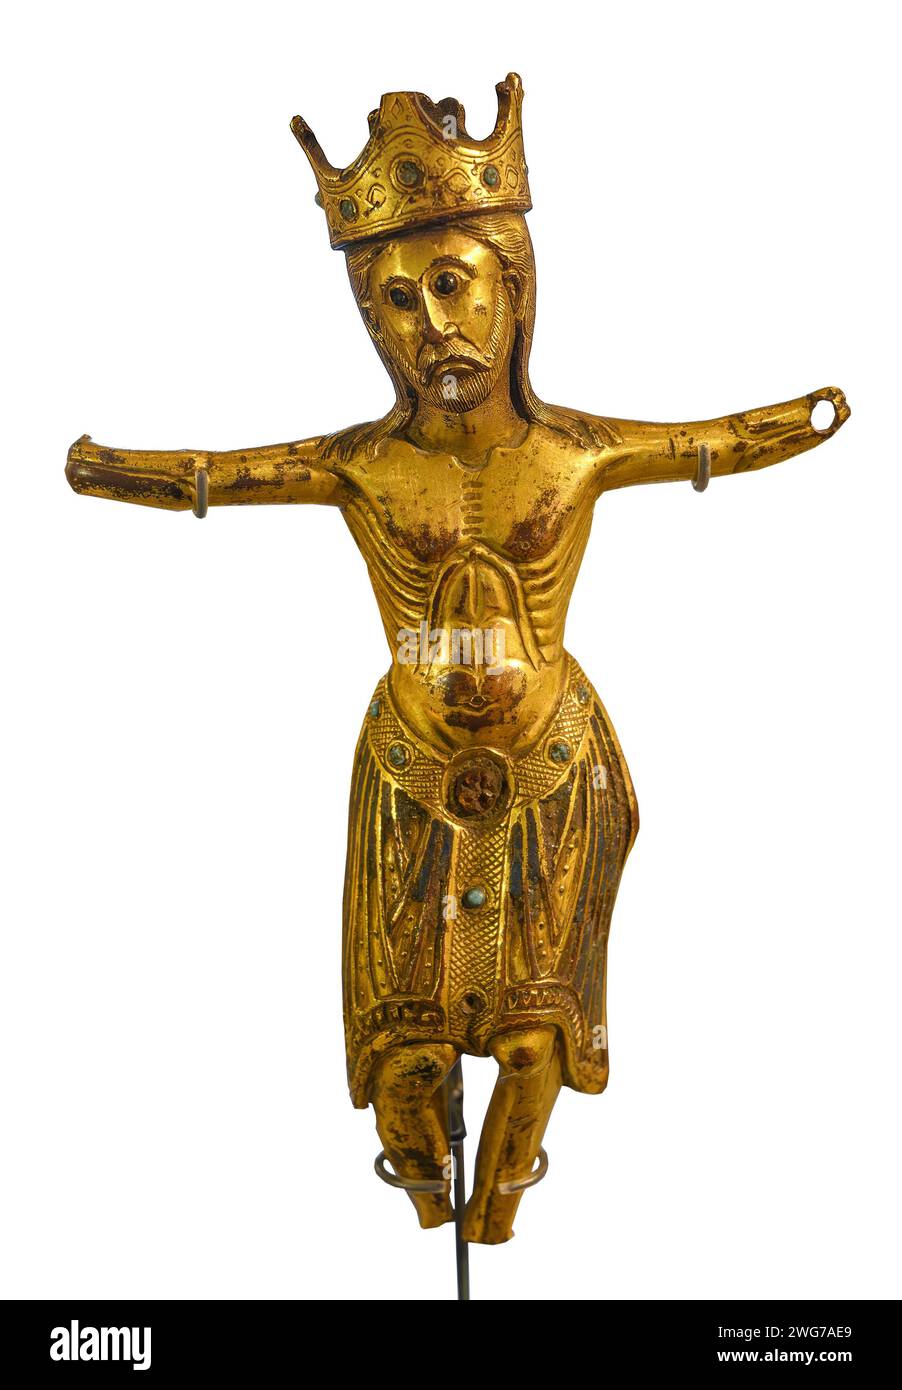 The St Mary's Abbey Figure of Christ, Yorkshire Museum, York, North Yorkshire, England, UK. Dates from 1200 to 1300 AD. Stock Photo